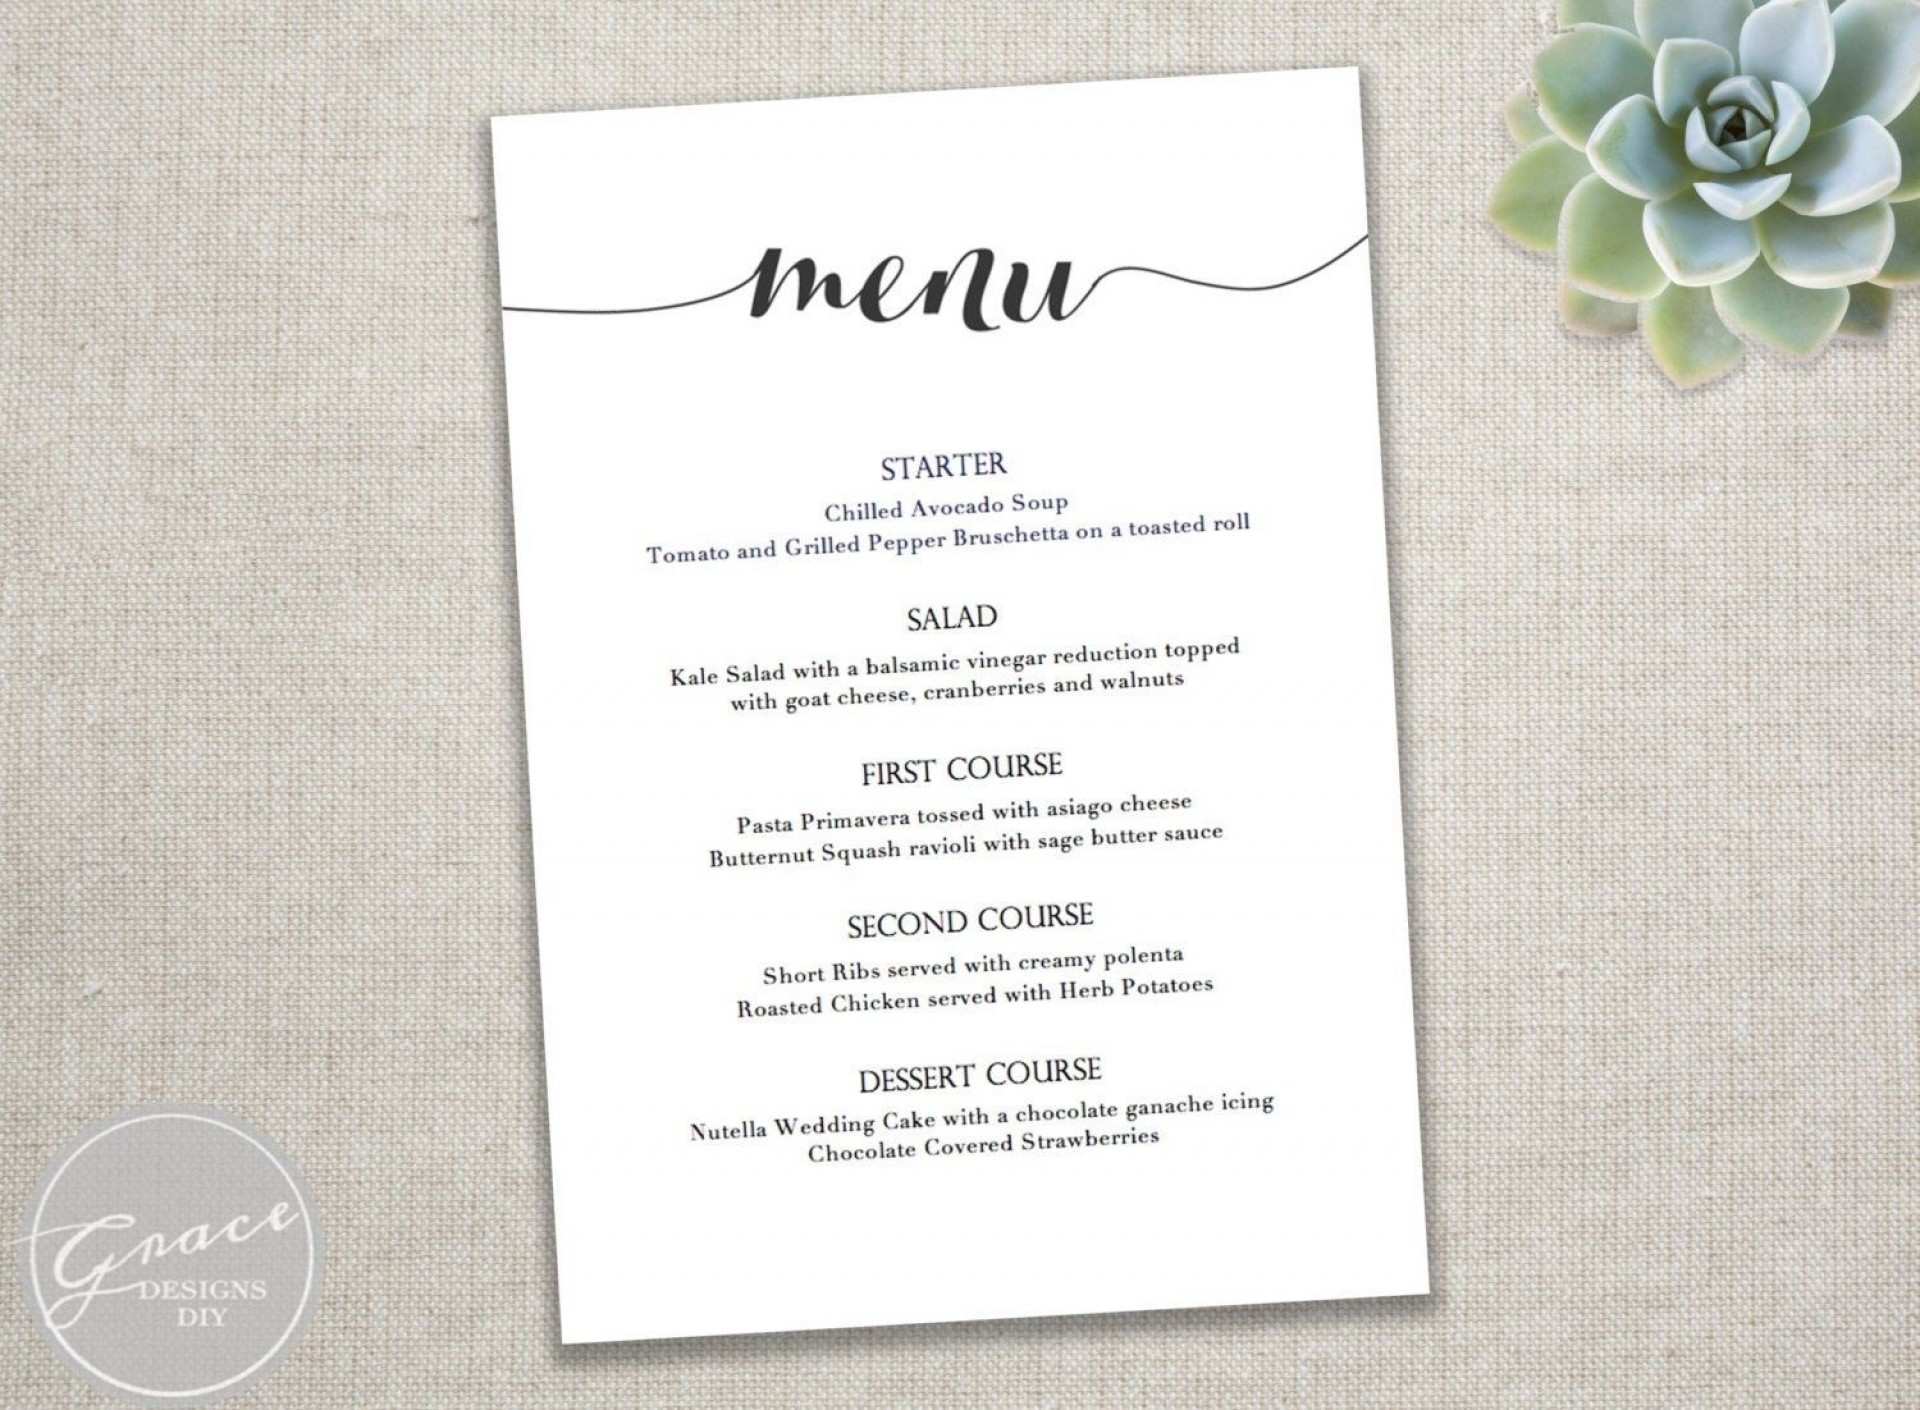 95 Report Menu Card Template Free Online For Free with Menu Card Template Free Online